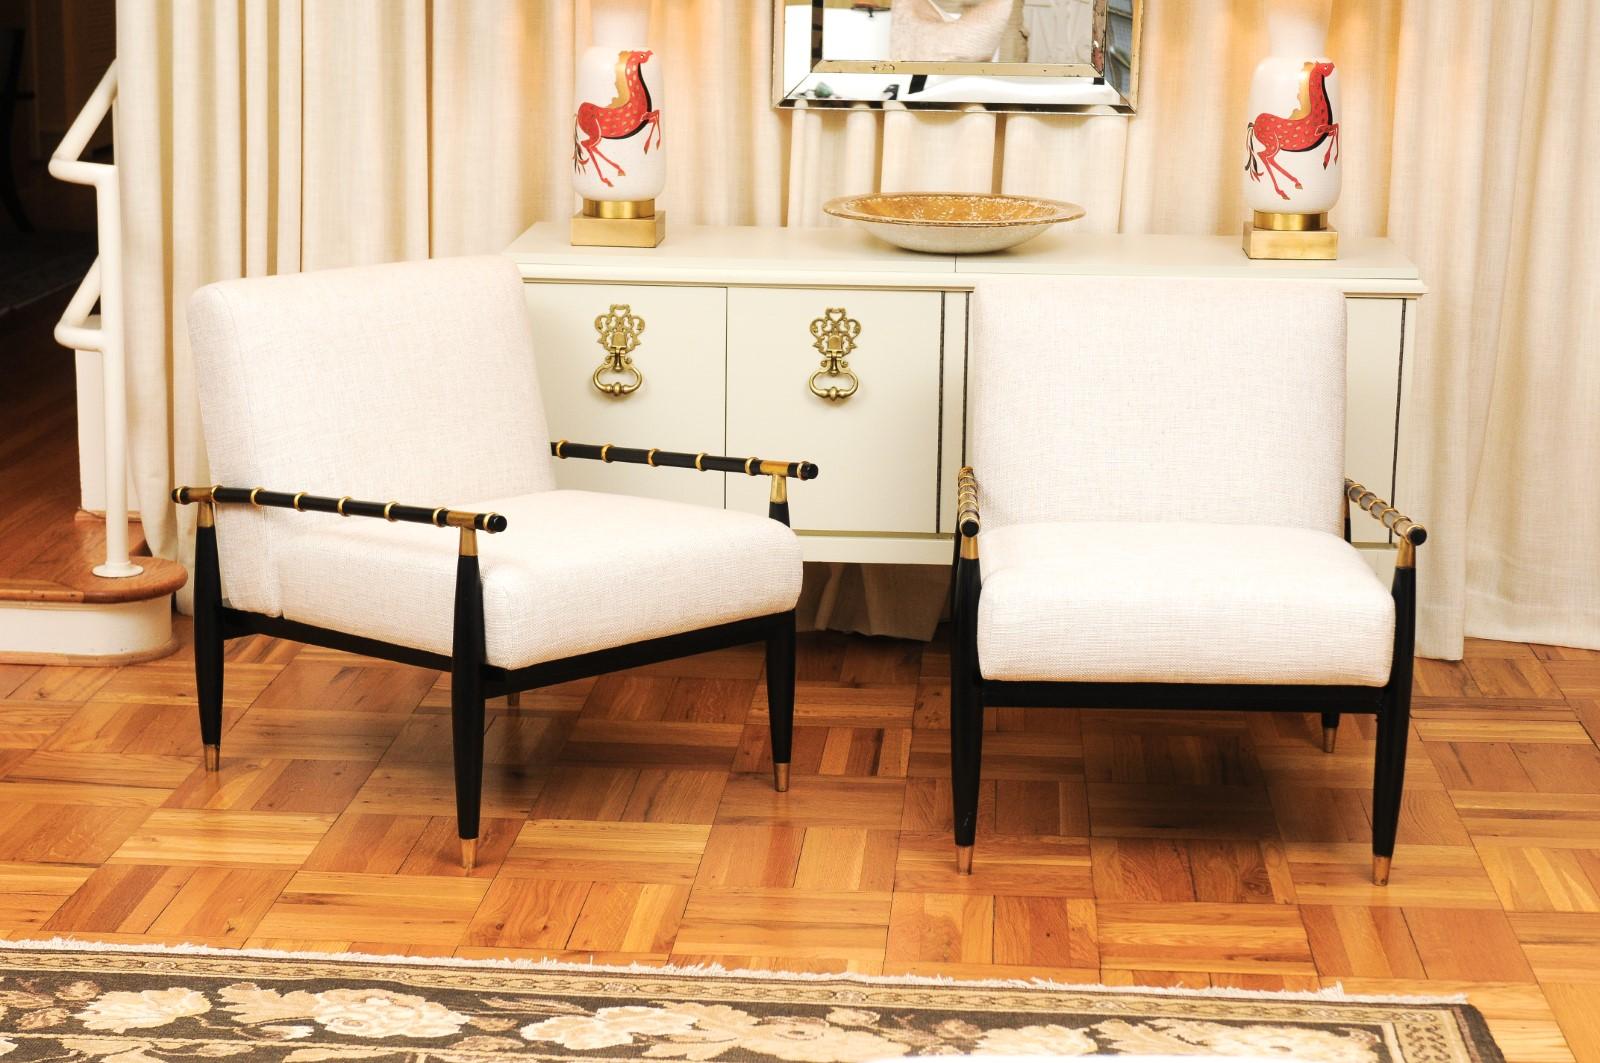 An exquisite meticulously restored pair of lounge chairs in the style of Tommi Parzinger, circa 1965. Sleek Mahogany frame with slender faux-bamboo arms. Accents and details in golf-leaf and solid brass. Exceptional design and craftsmanship.